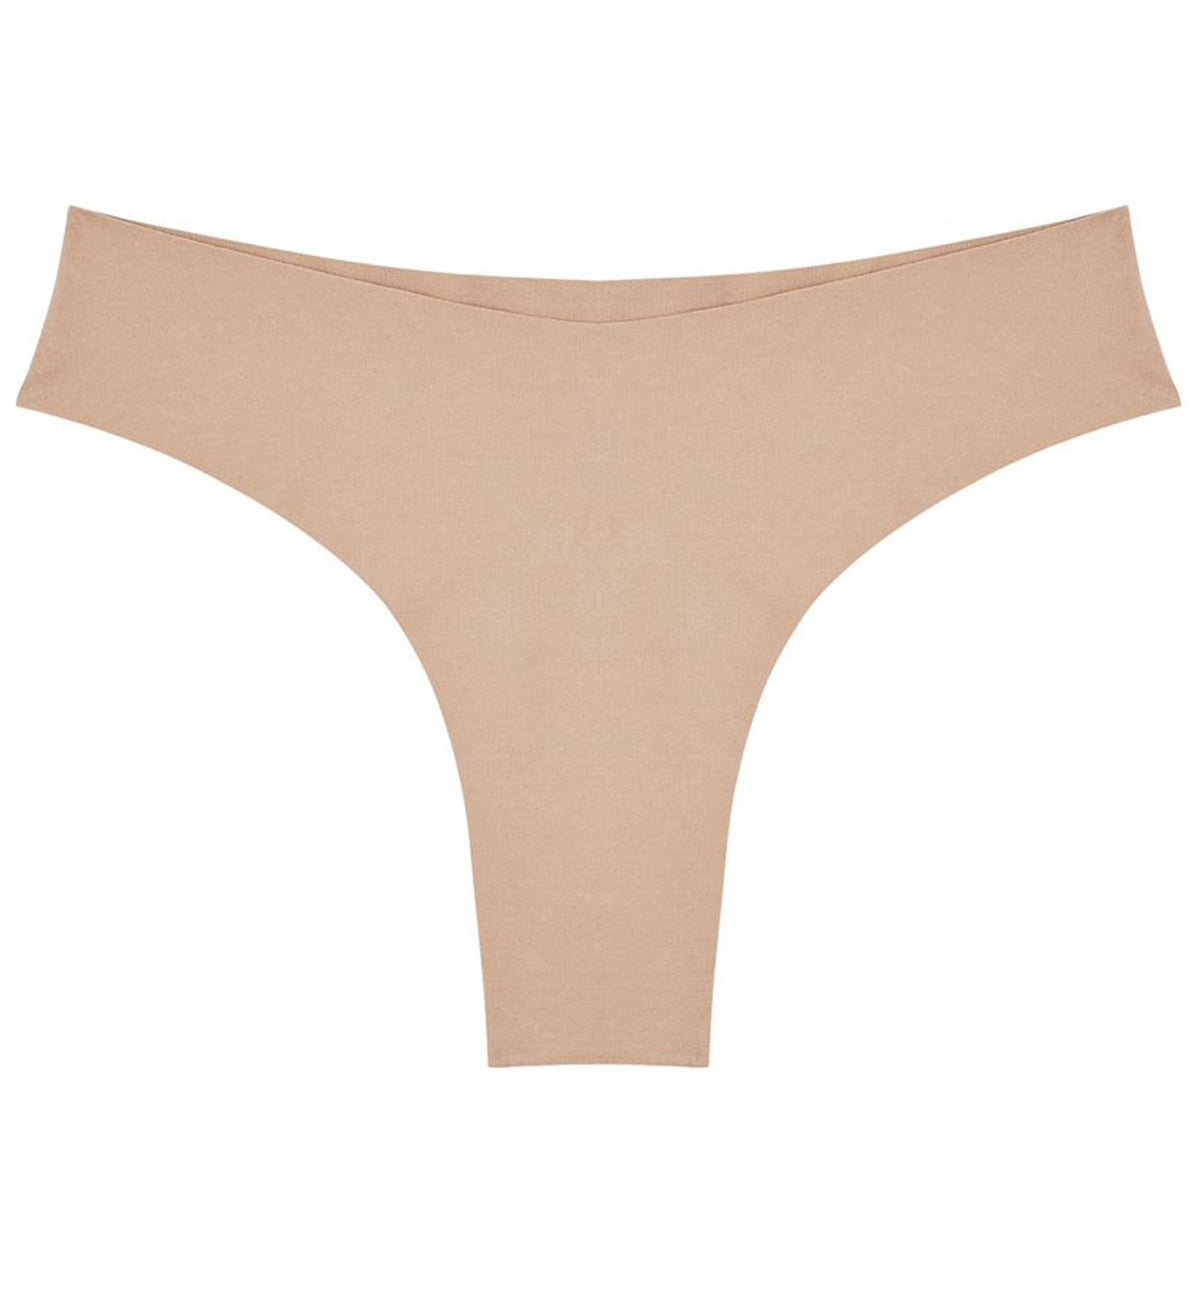 Panty Promise Low Rise Thong,XS,Pale - Pale,XS